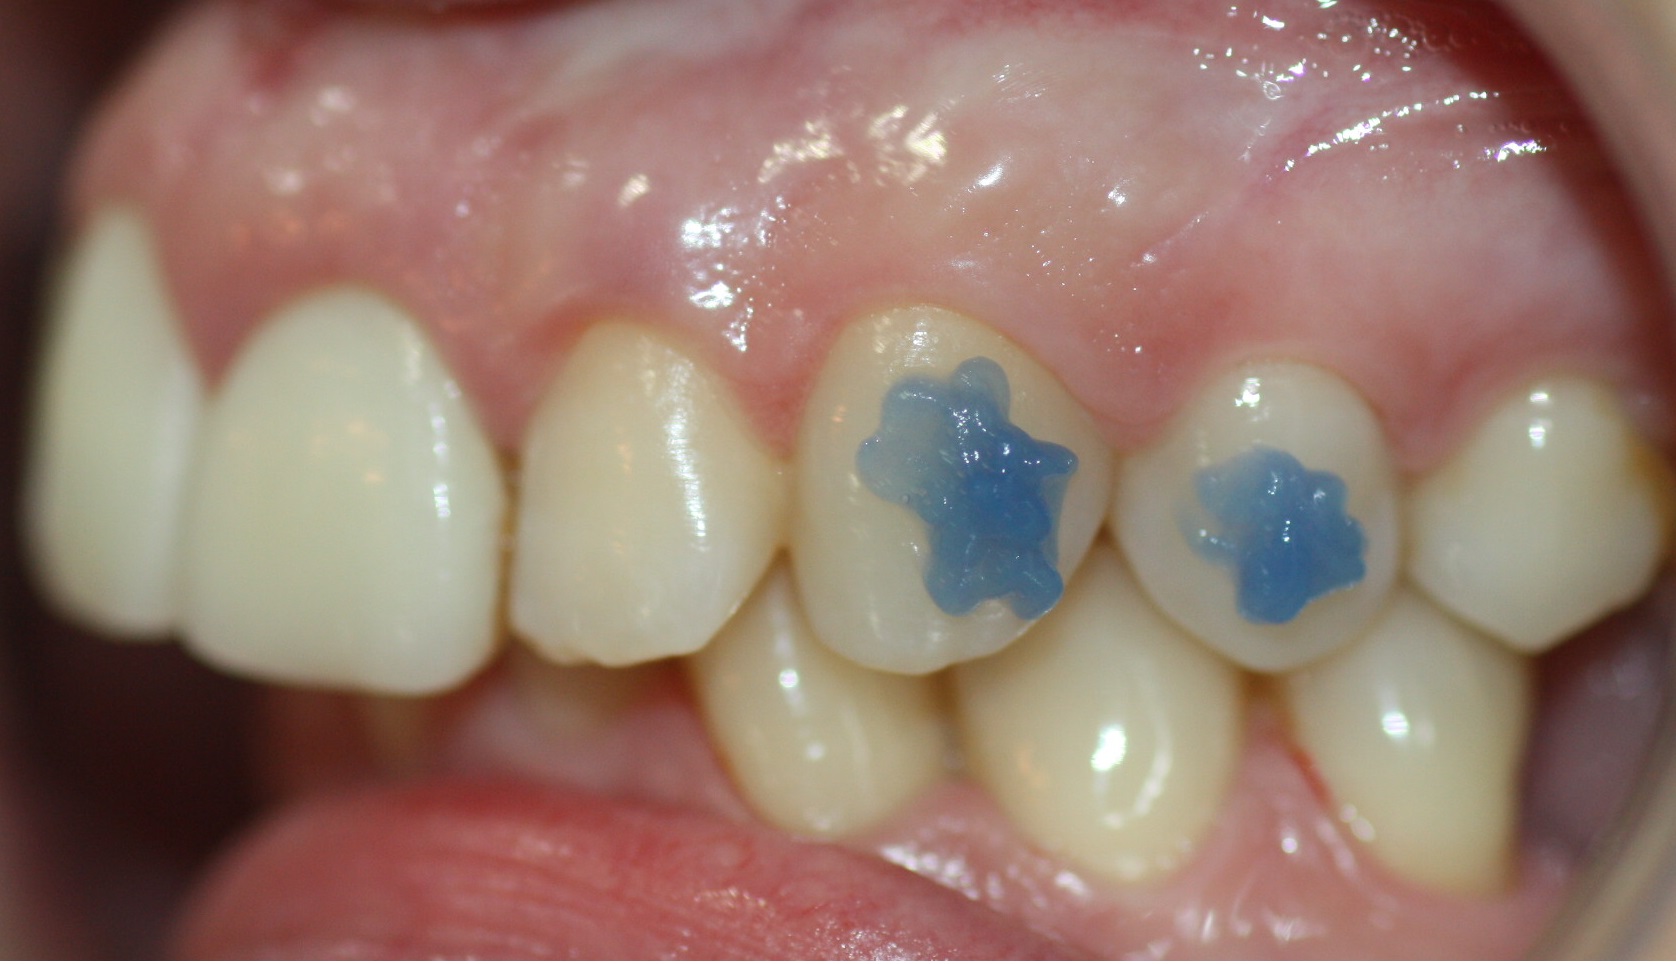 The orthodontist will apply the orthophosphoric gel to the area where the attachment is to be placed.